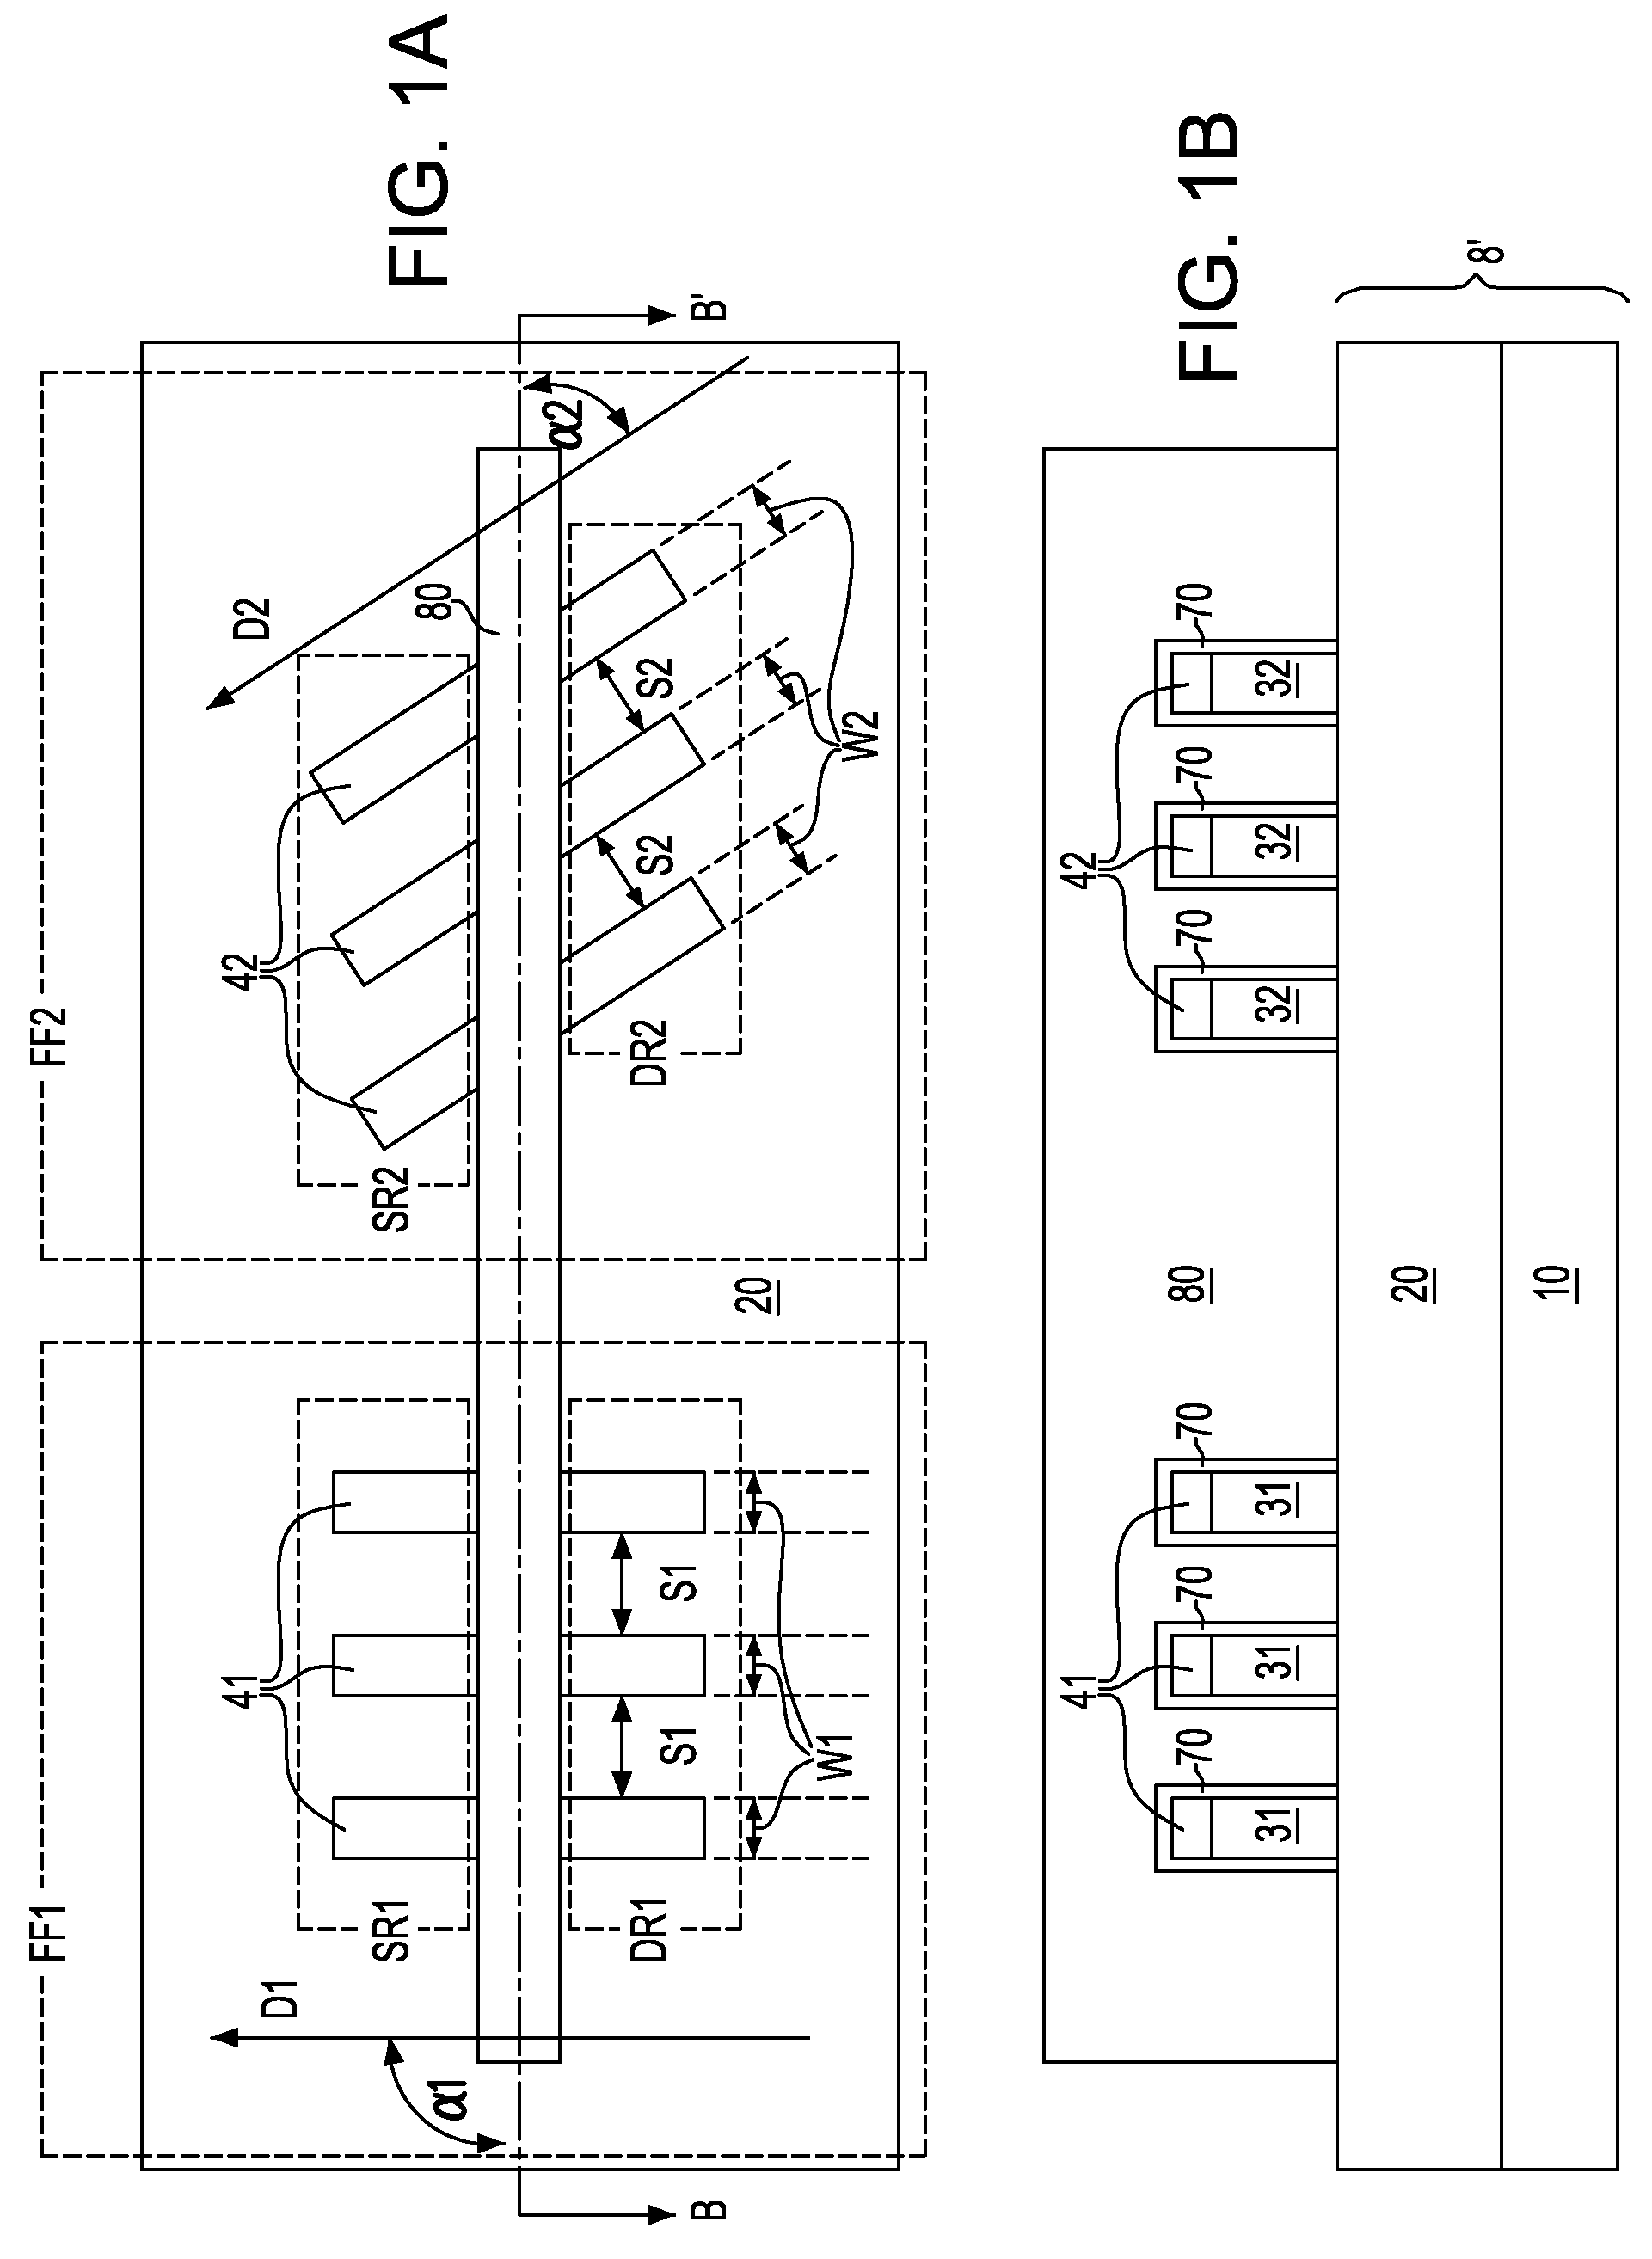 FinFET with sublithographic fin width